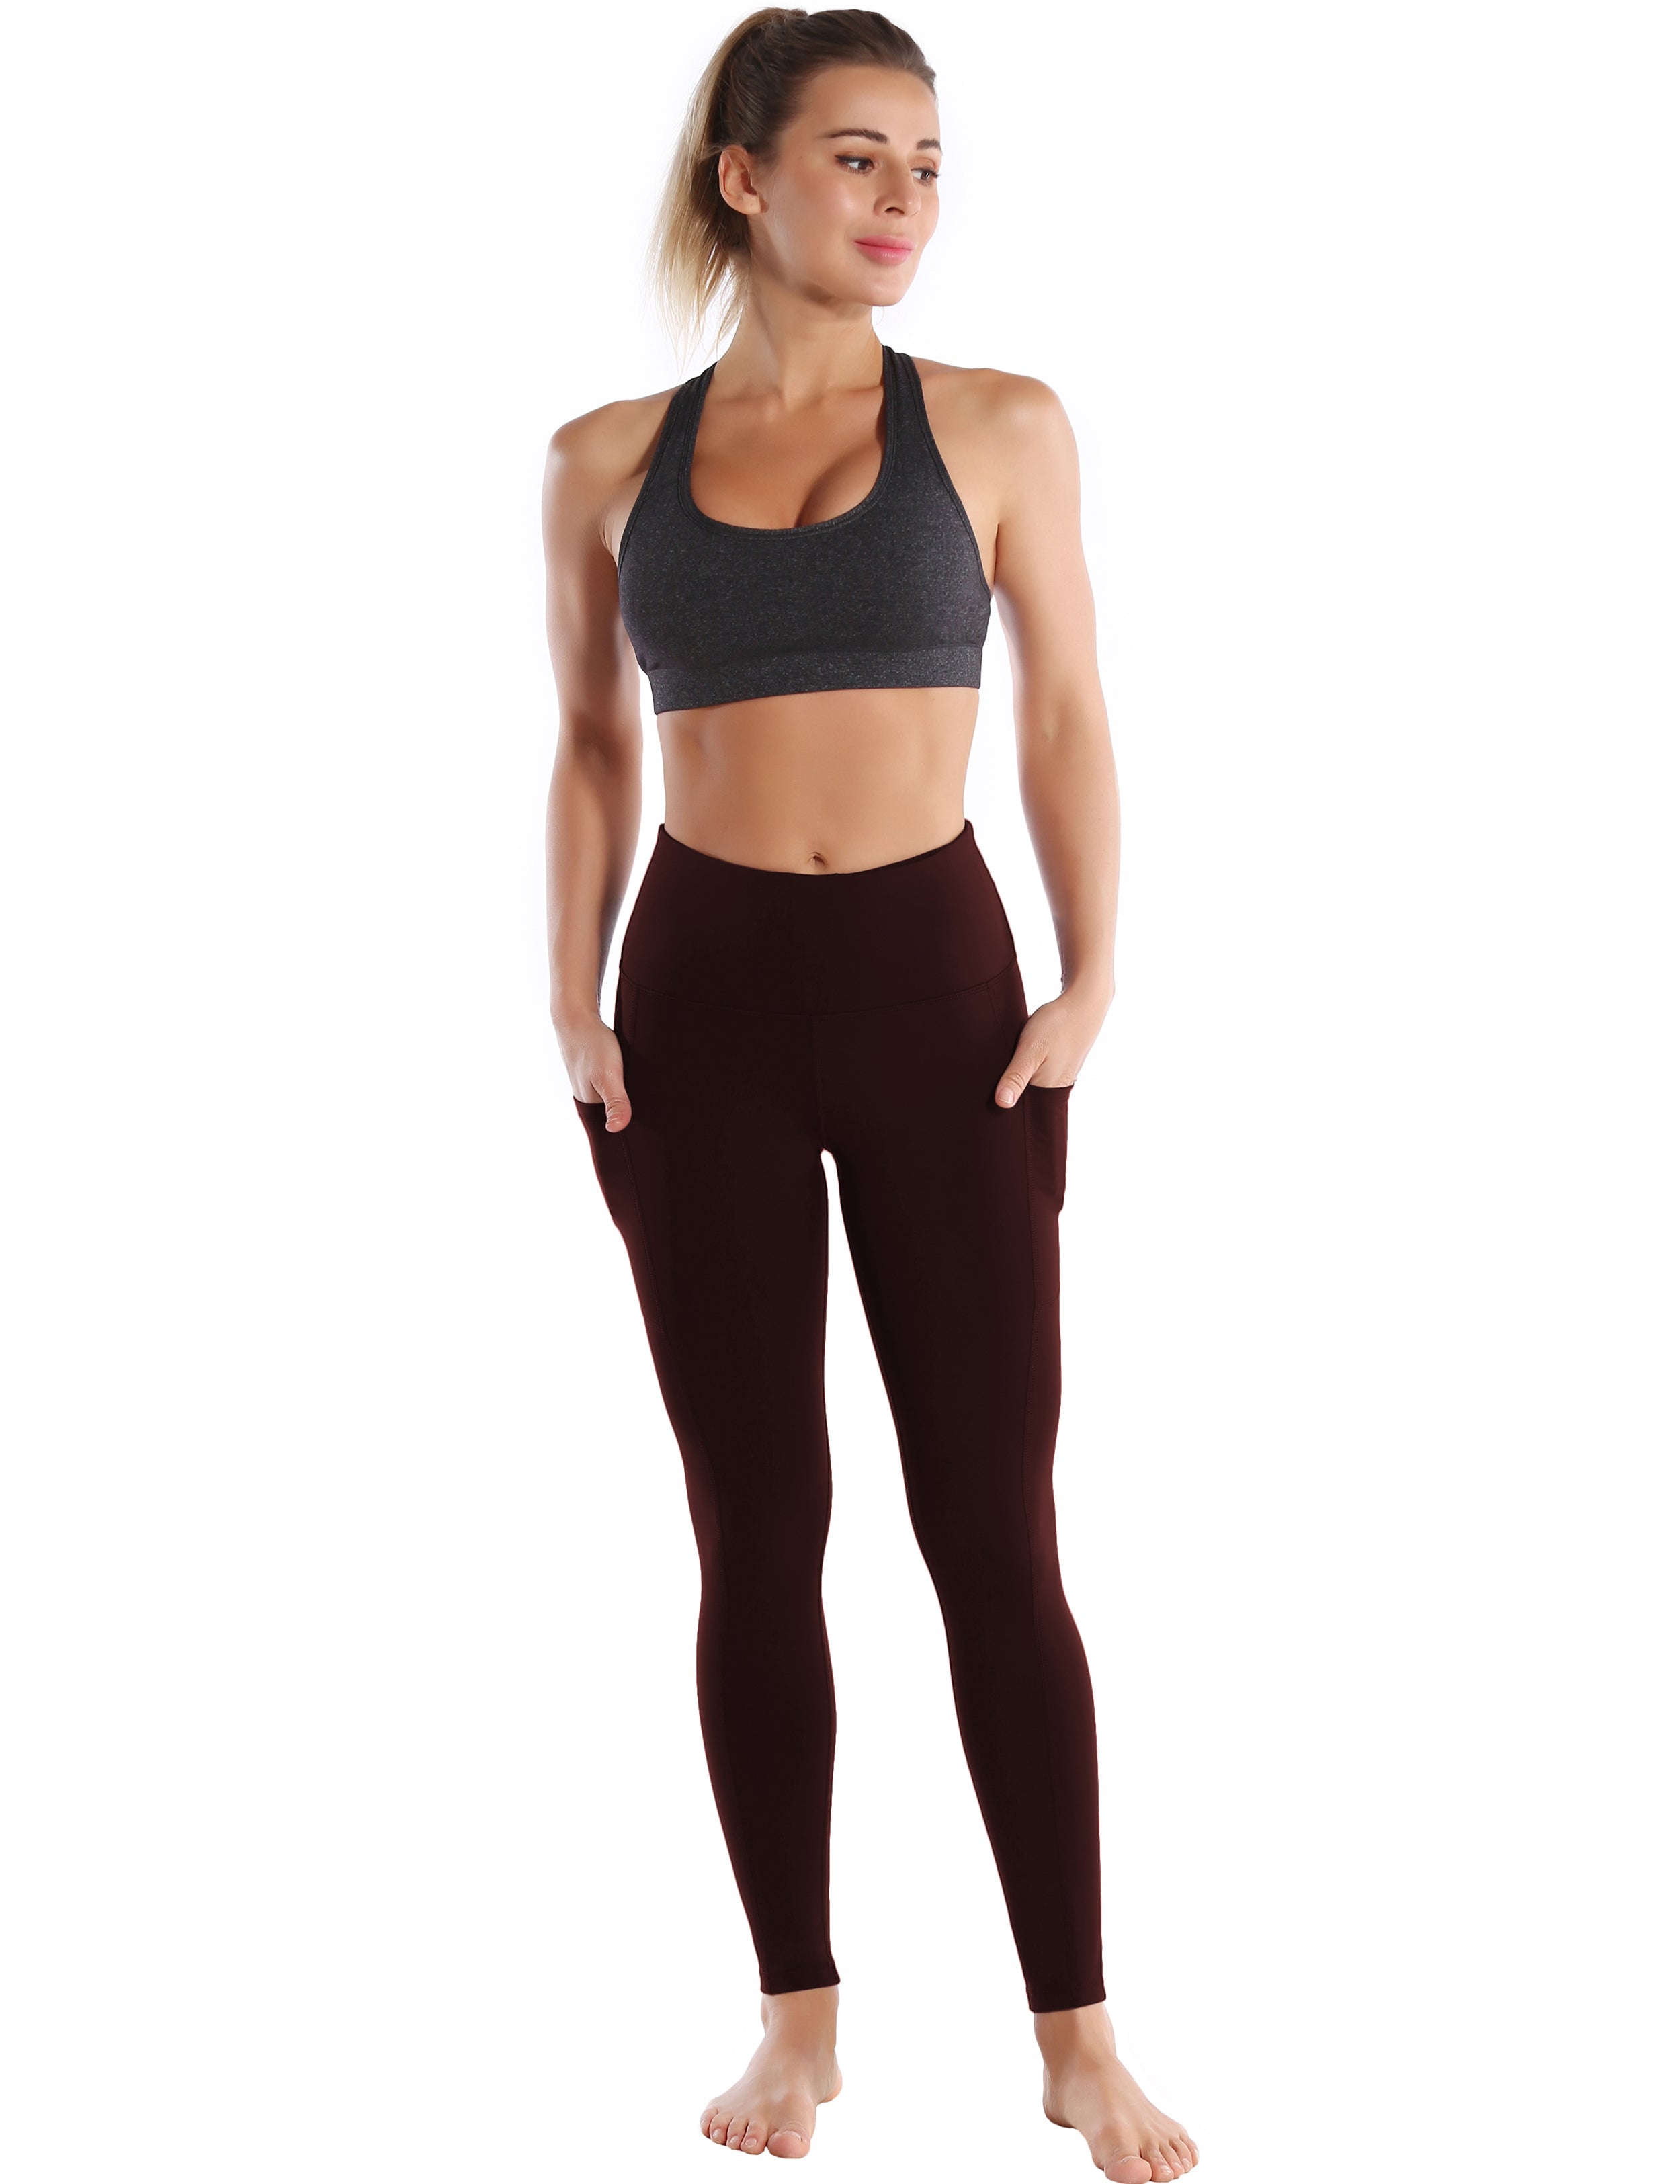 Hip Line Side Pockets Jogging Pants mahoganymaroon Sexy Hip Line Side Pockets 75%Nylon/25%Spandex Fabric doesn't attract lint easily 4-way stretch No see-through Moisture-wicking Tummy control Inner pocket Two lengths